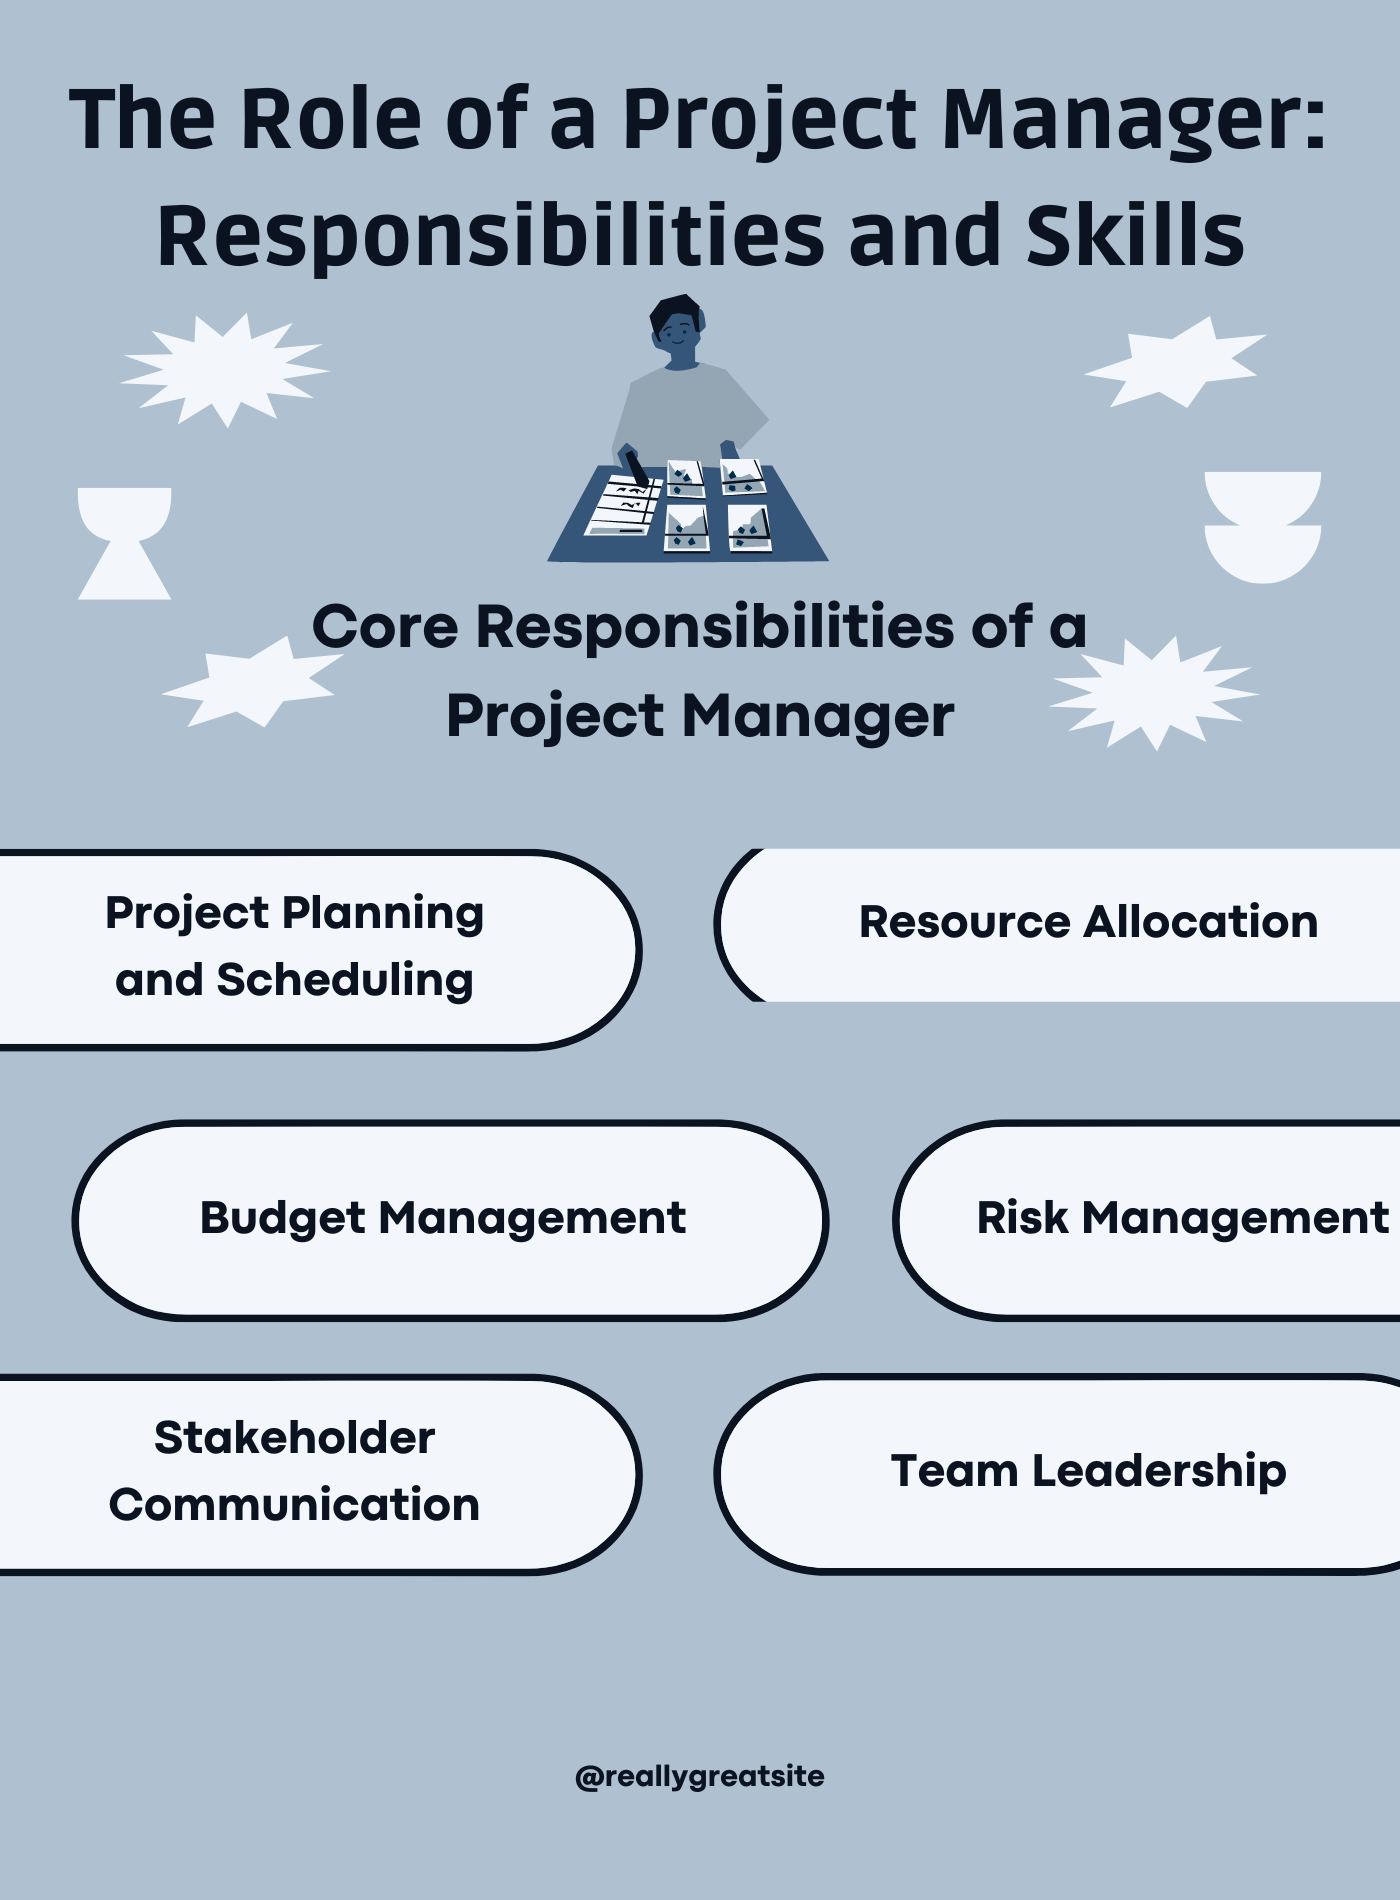 The Role of a Project Manager: Responsibilities and Skills